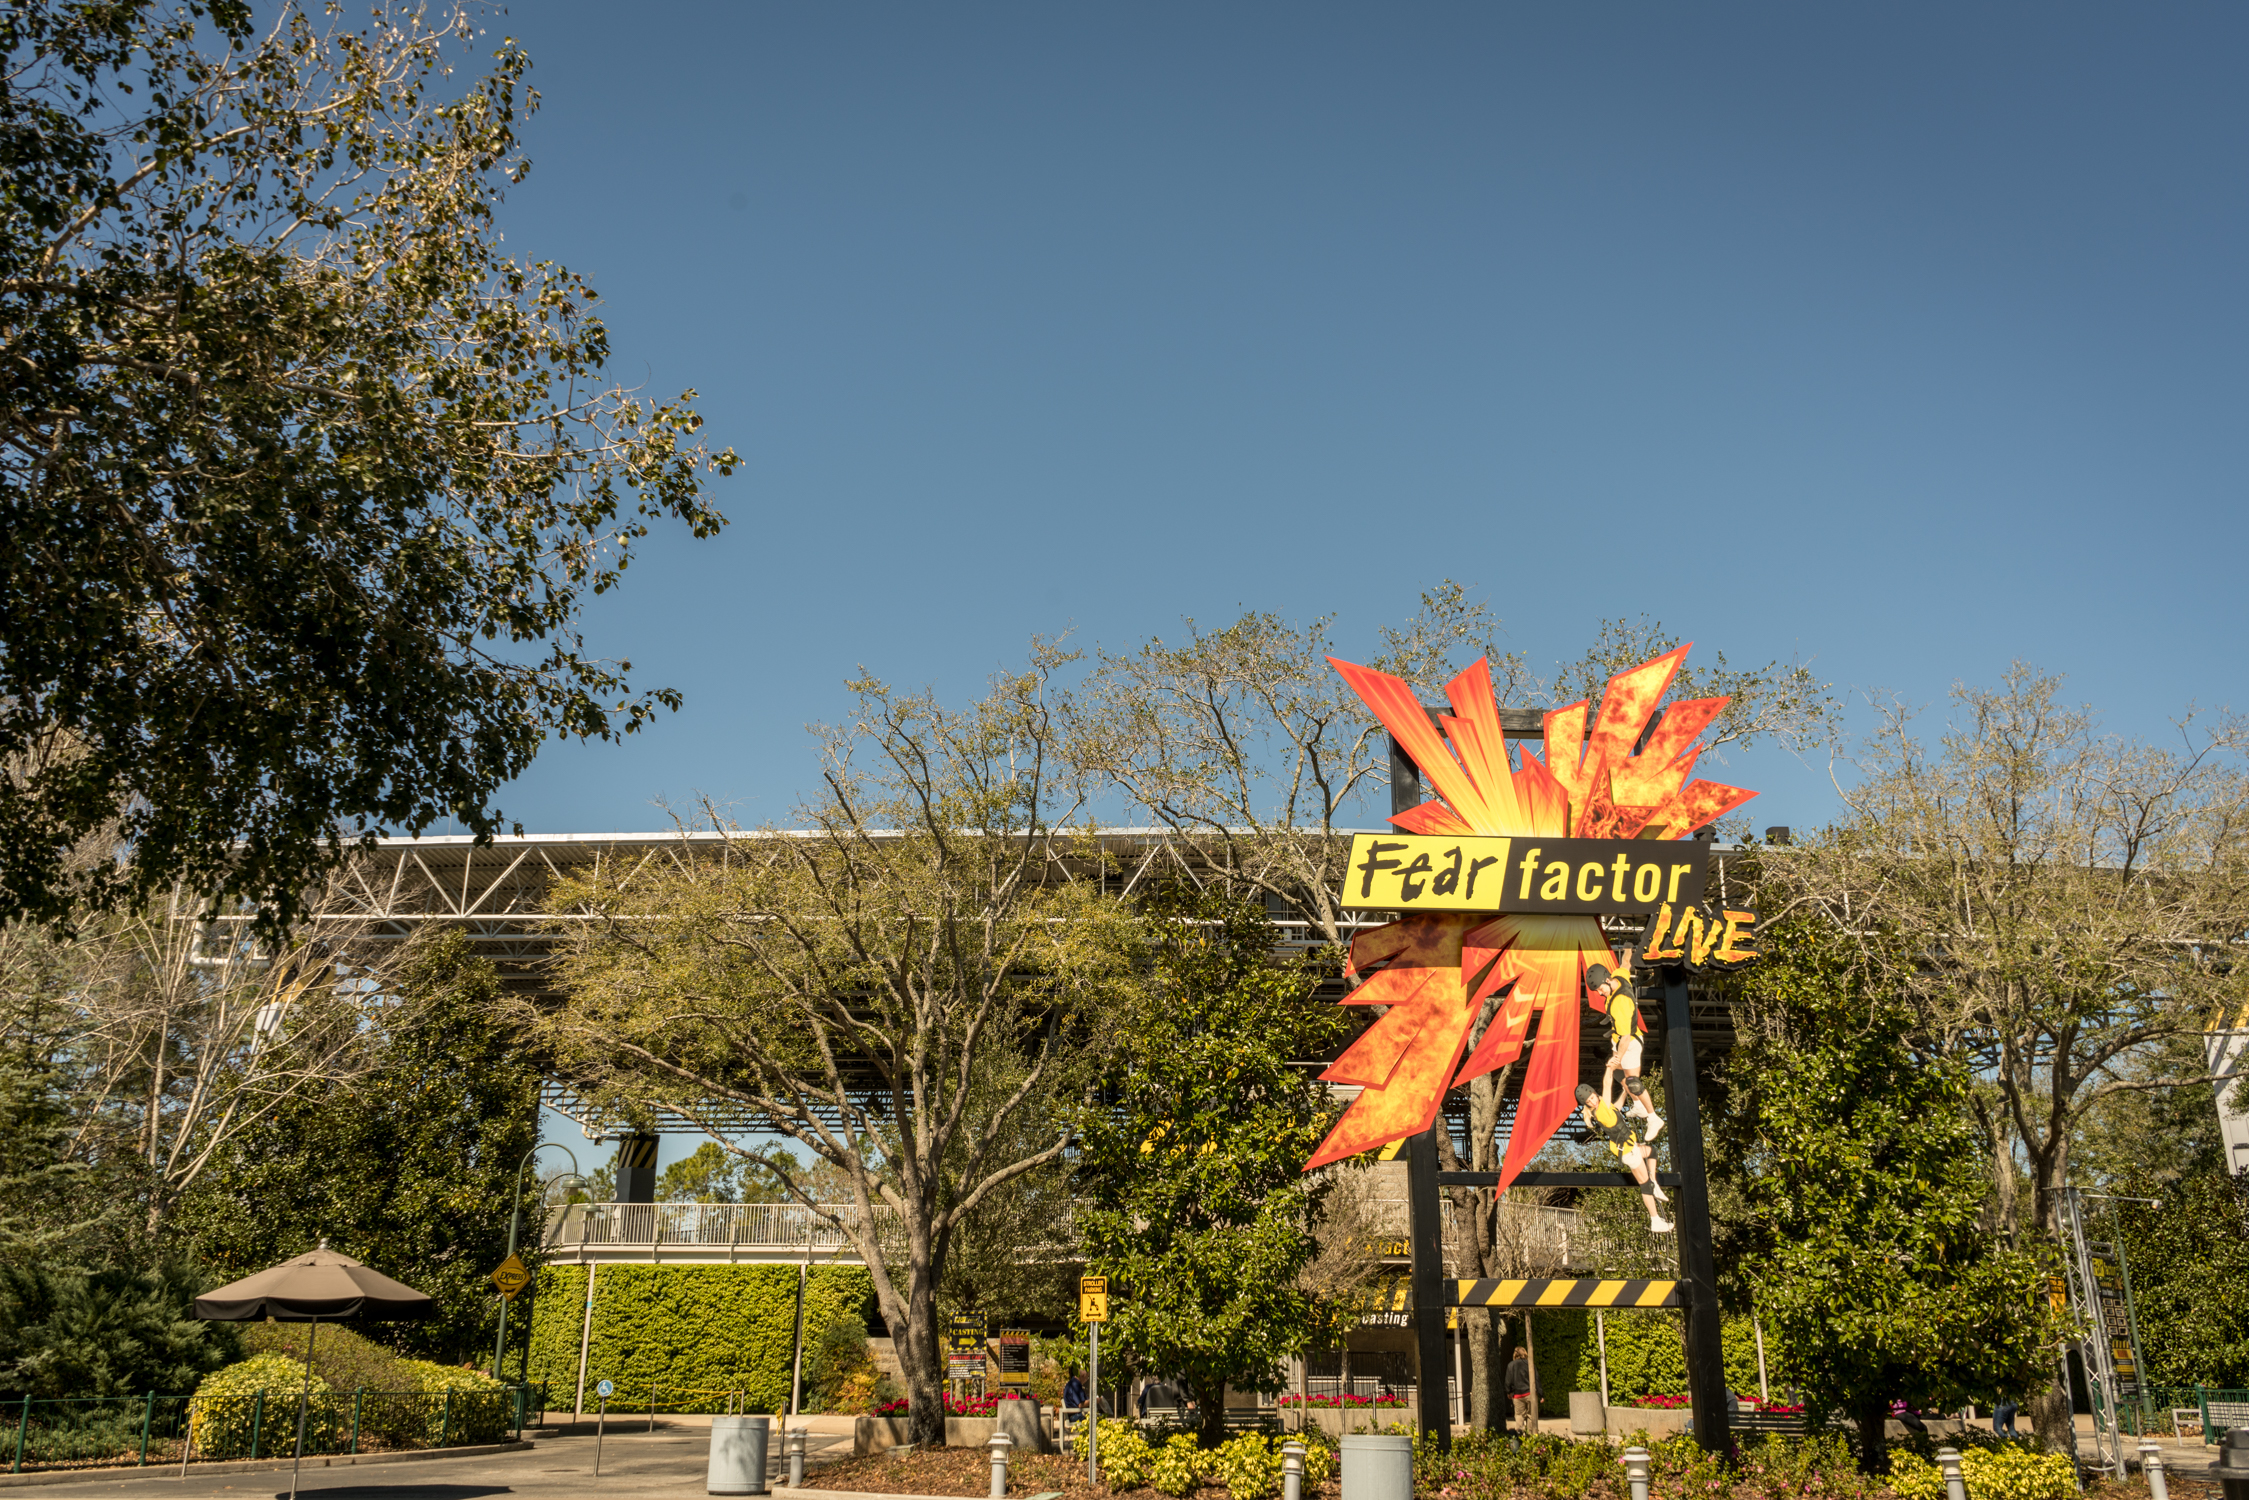 The theater entrance to Fear Factor Live